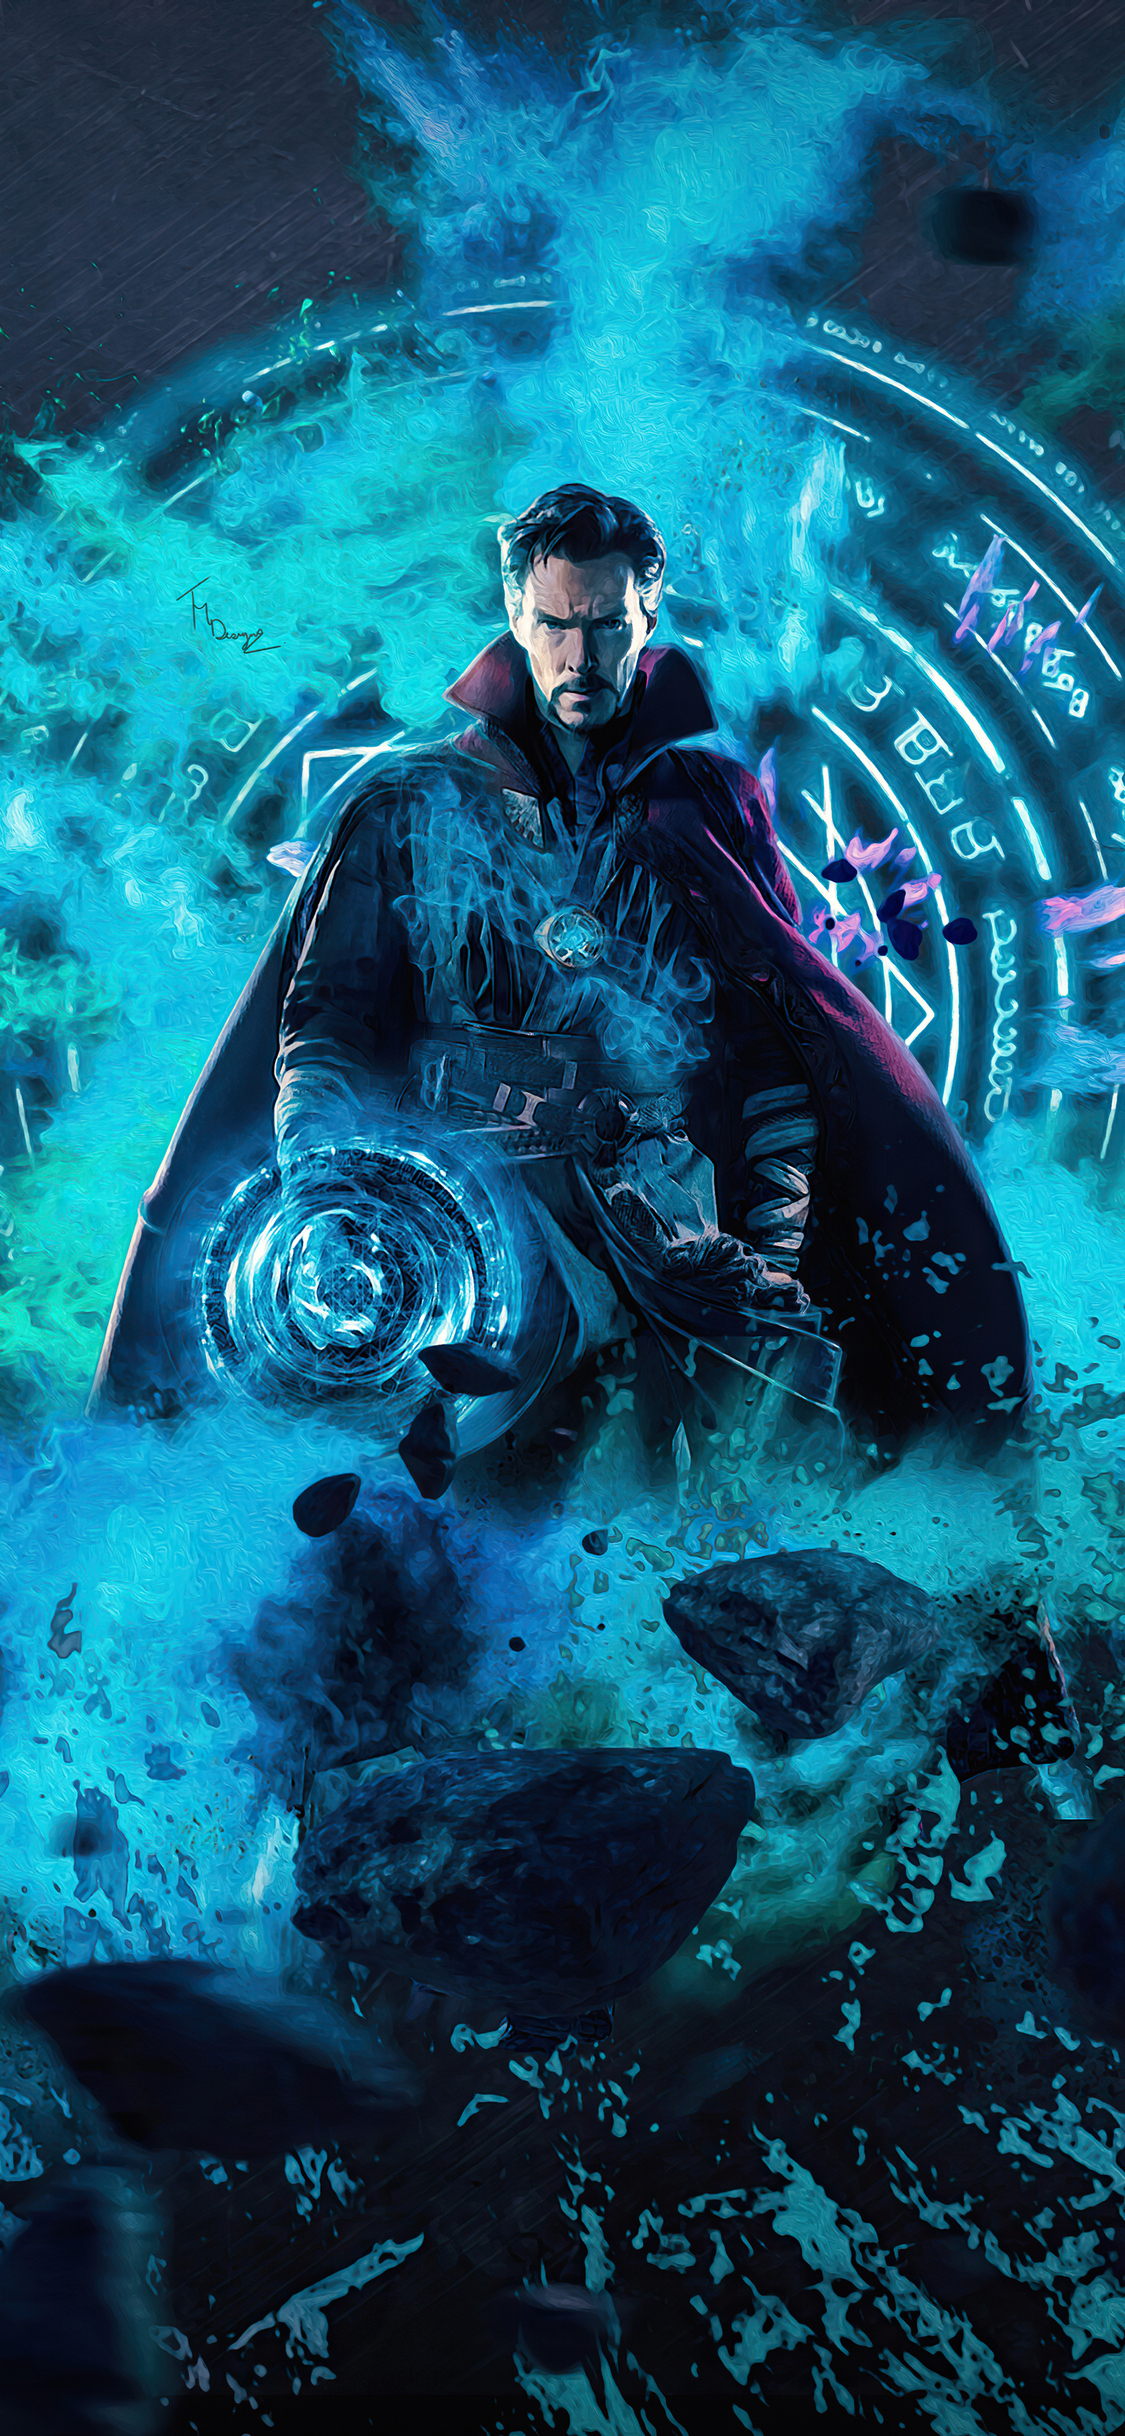 Doctor Strange 4k Artwork 2020 iPhone XS, iPhone iPhone X HD 4k Wallpaper, Image, Background, Photo and Picture